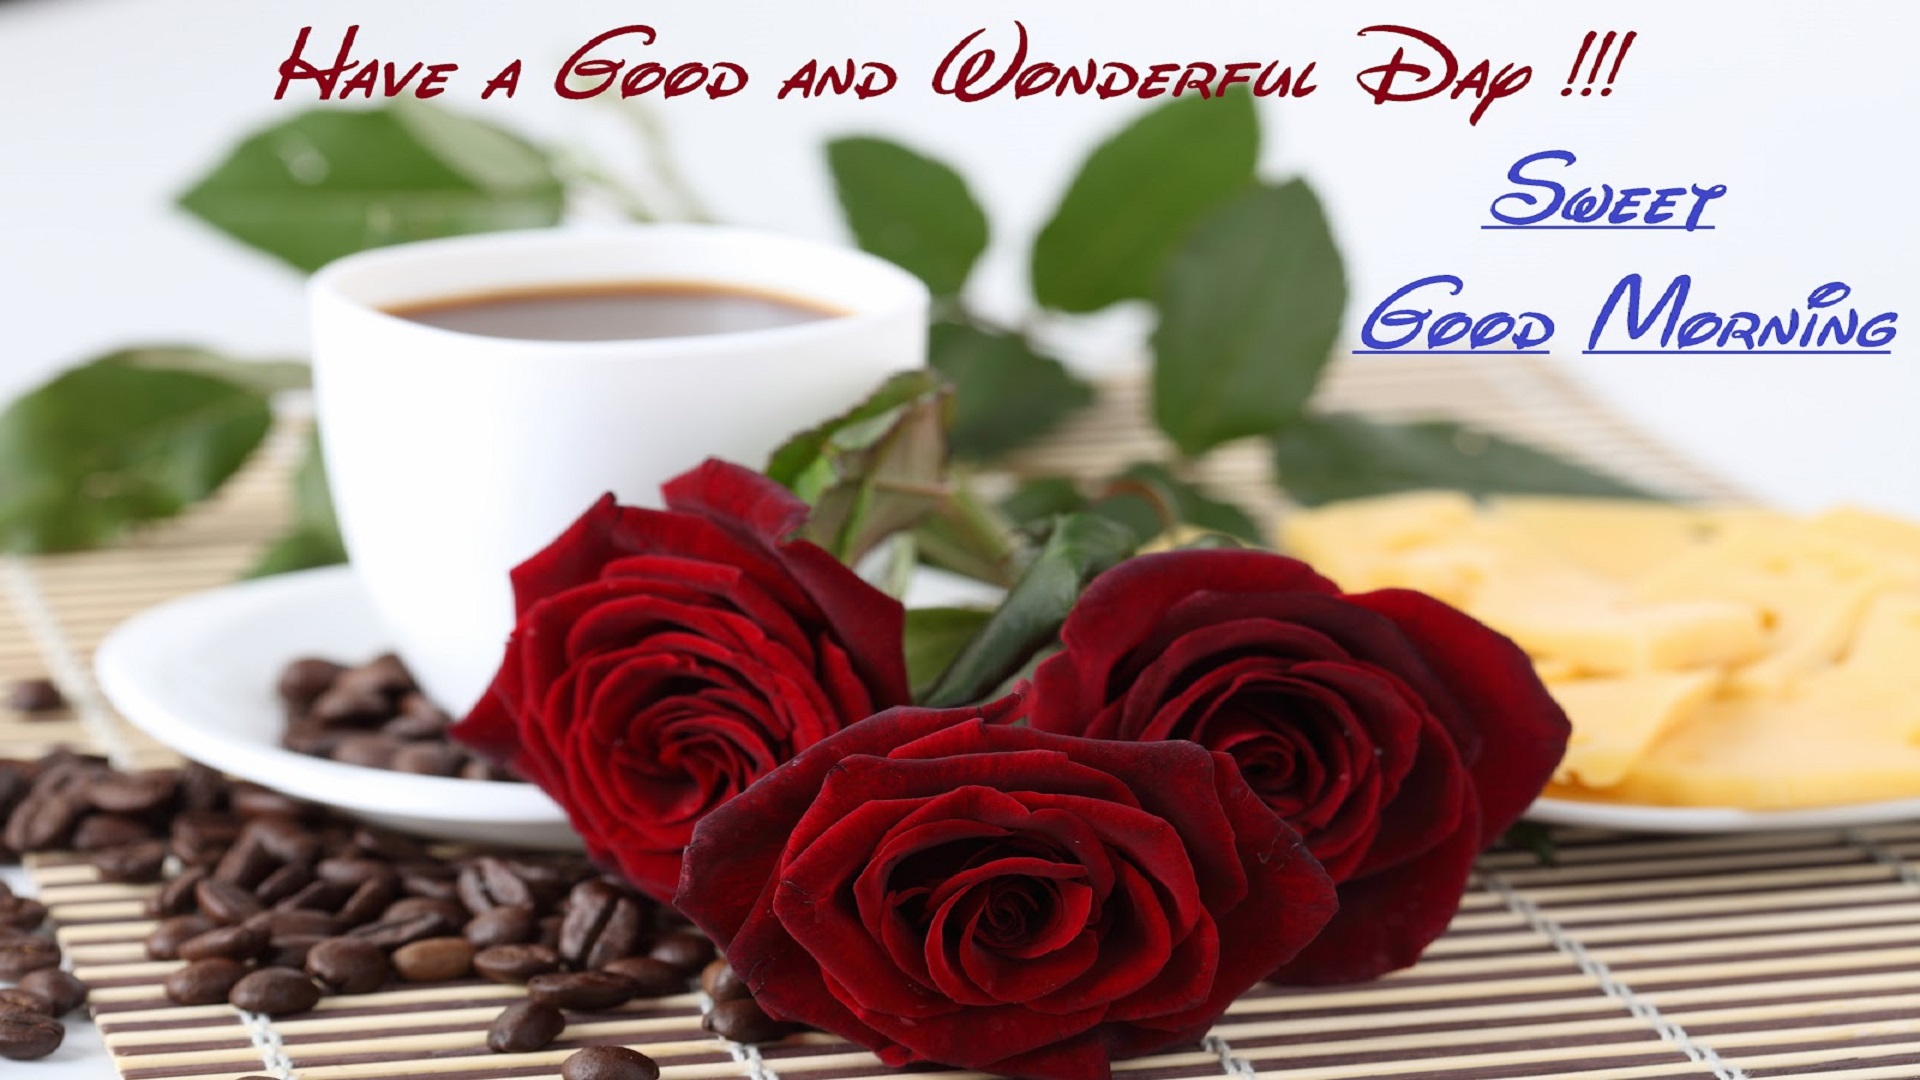 Good Morning Wishes Wallpaper Free Download - HD Wallpaper 